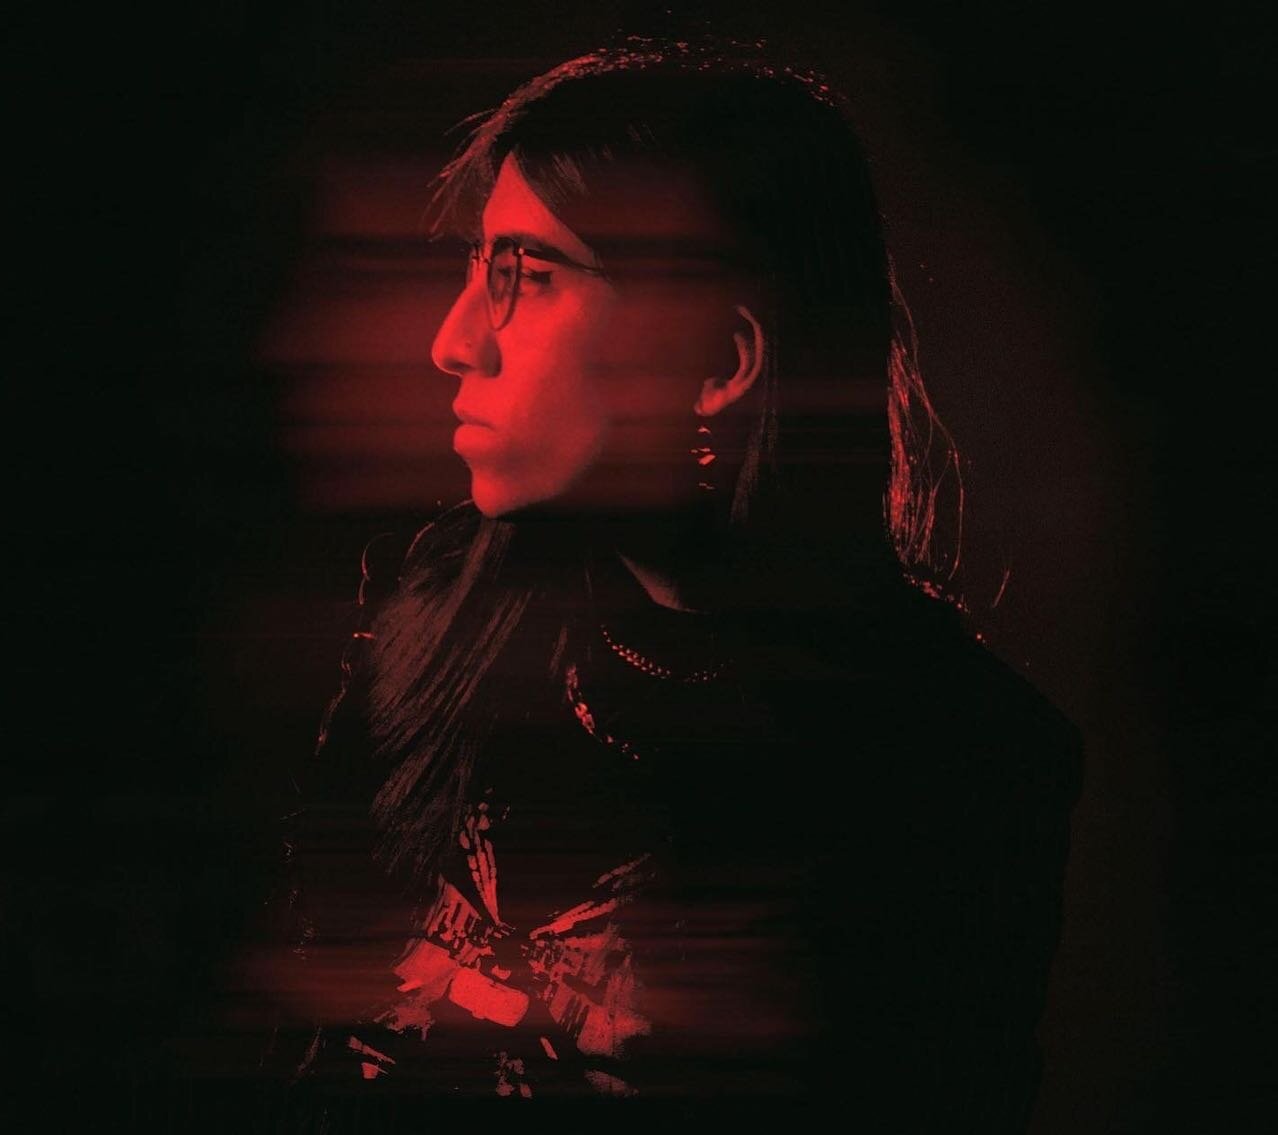 &quot;Rachika Nayar wants to destroy you and put you back together&quot; @thefader 

In just two short years, @rachikanayar 's processed guitar sounds have won over post-rock and electronic music fans alike. 

Her 2021 debut Our Hands Against the Dus